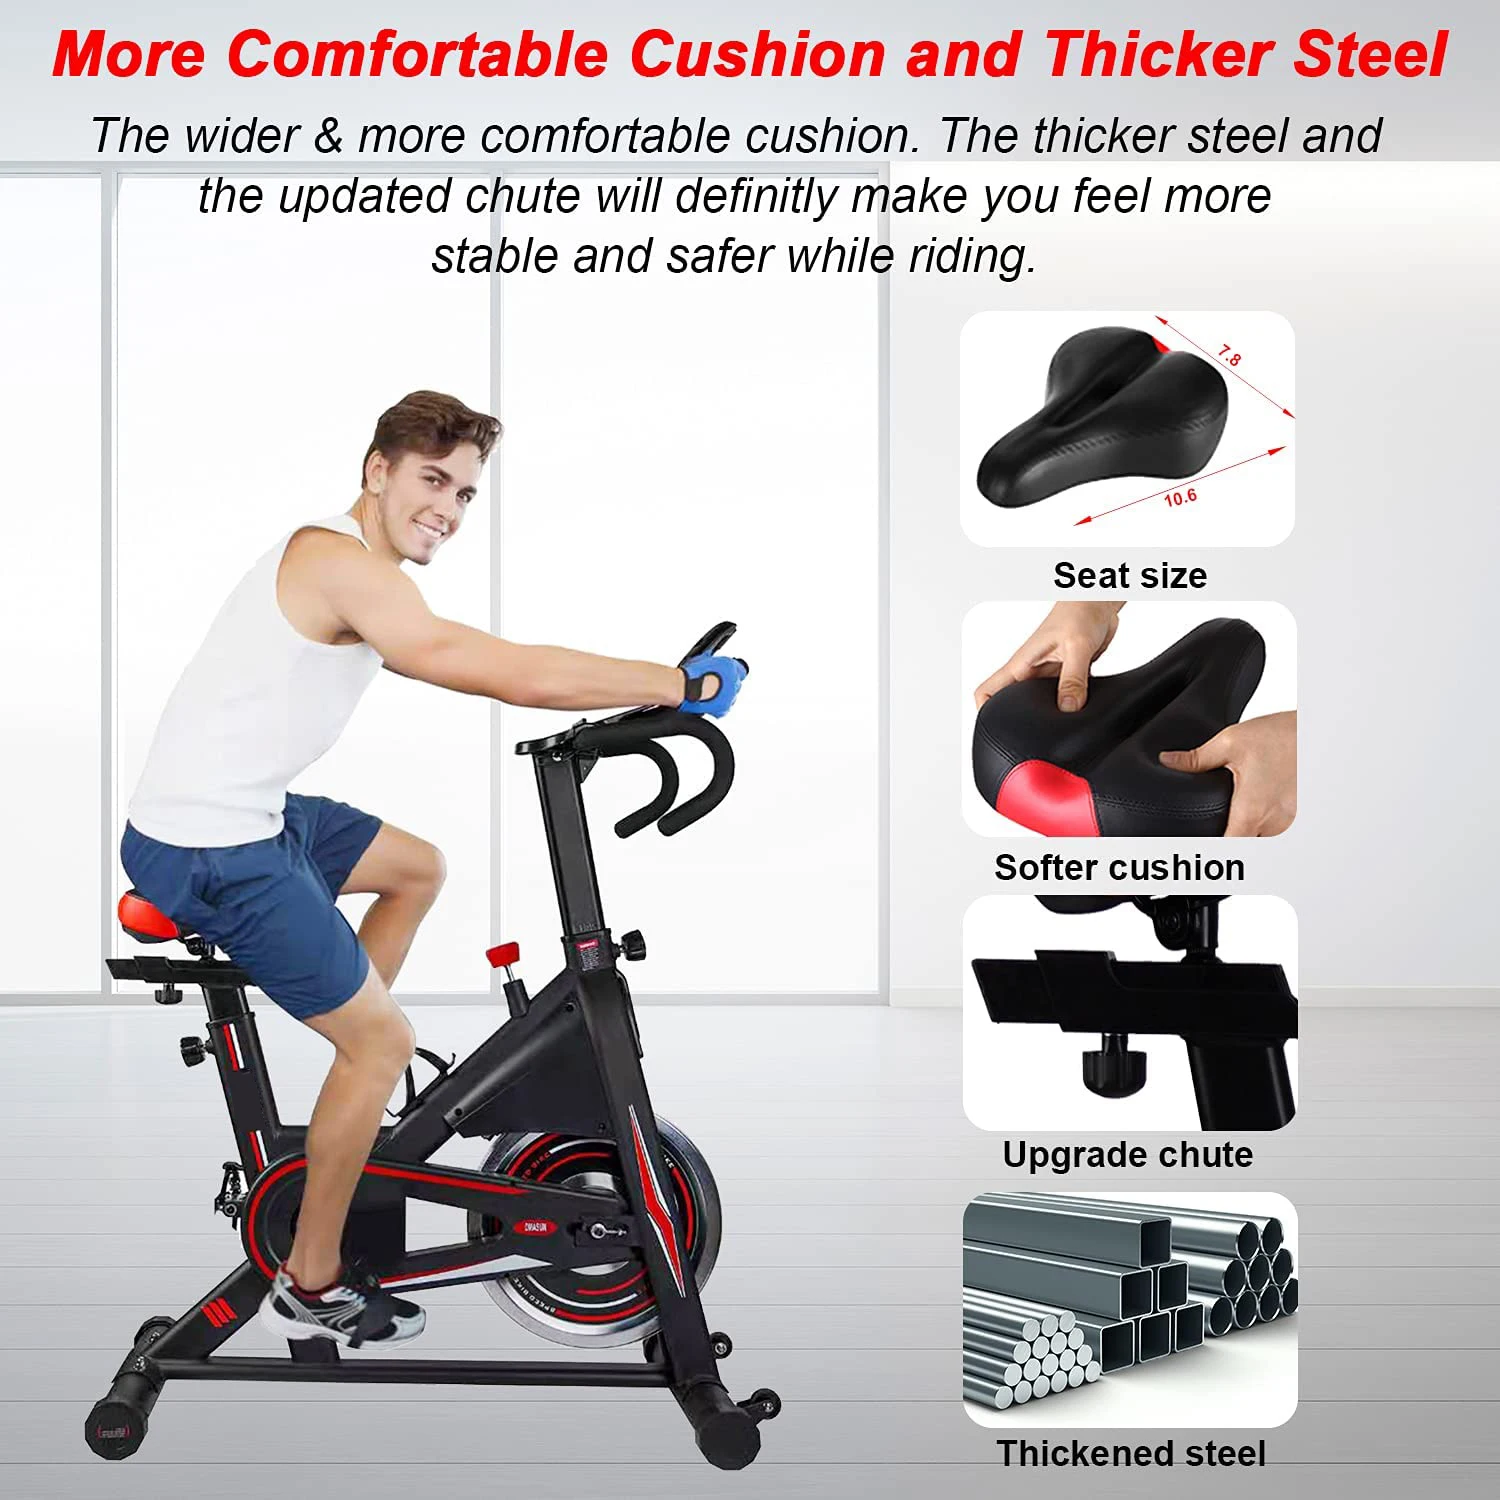 HUIRONG New Trends Static Portable Home Gym Fitness Indoor Cycling Bike Stationary Magnetic Resistance Exercise Spinning Bike